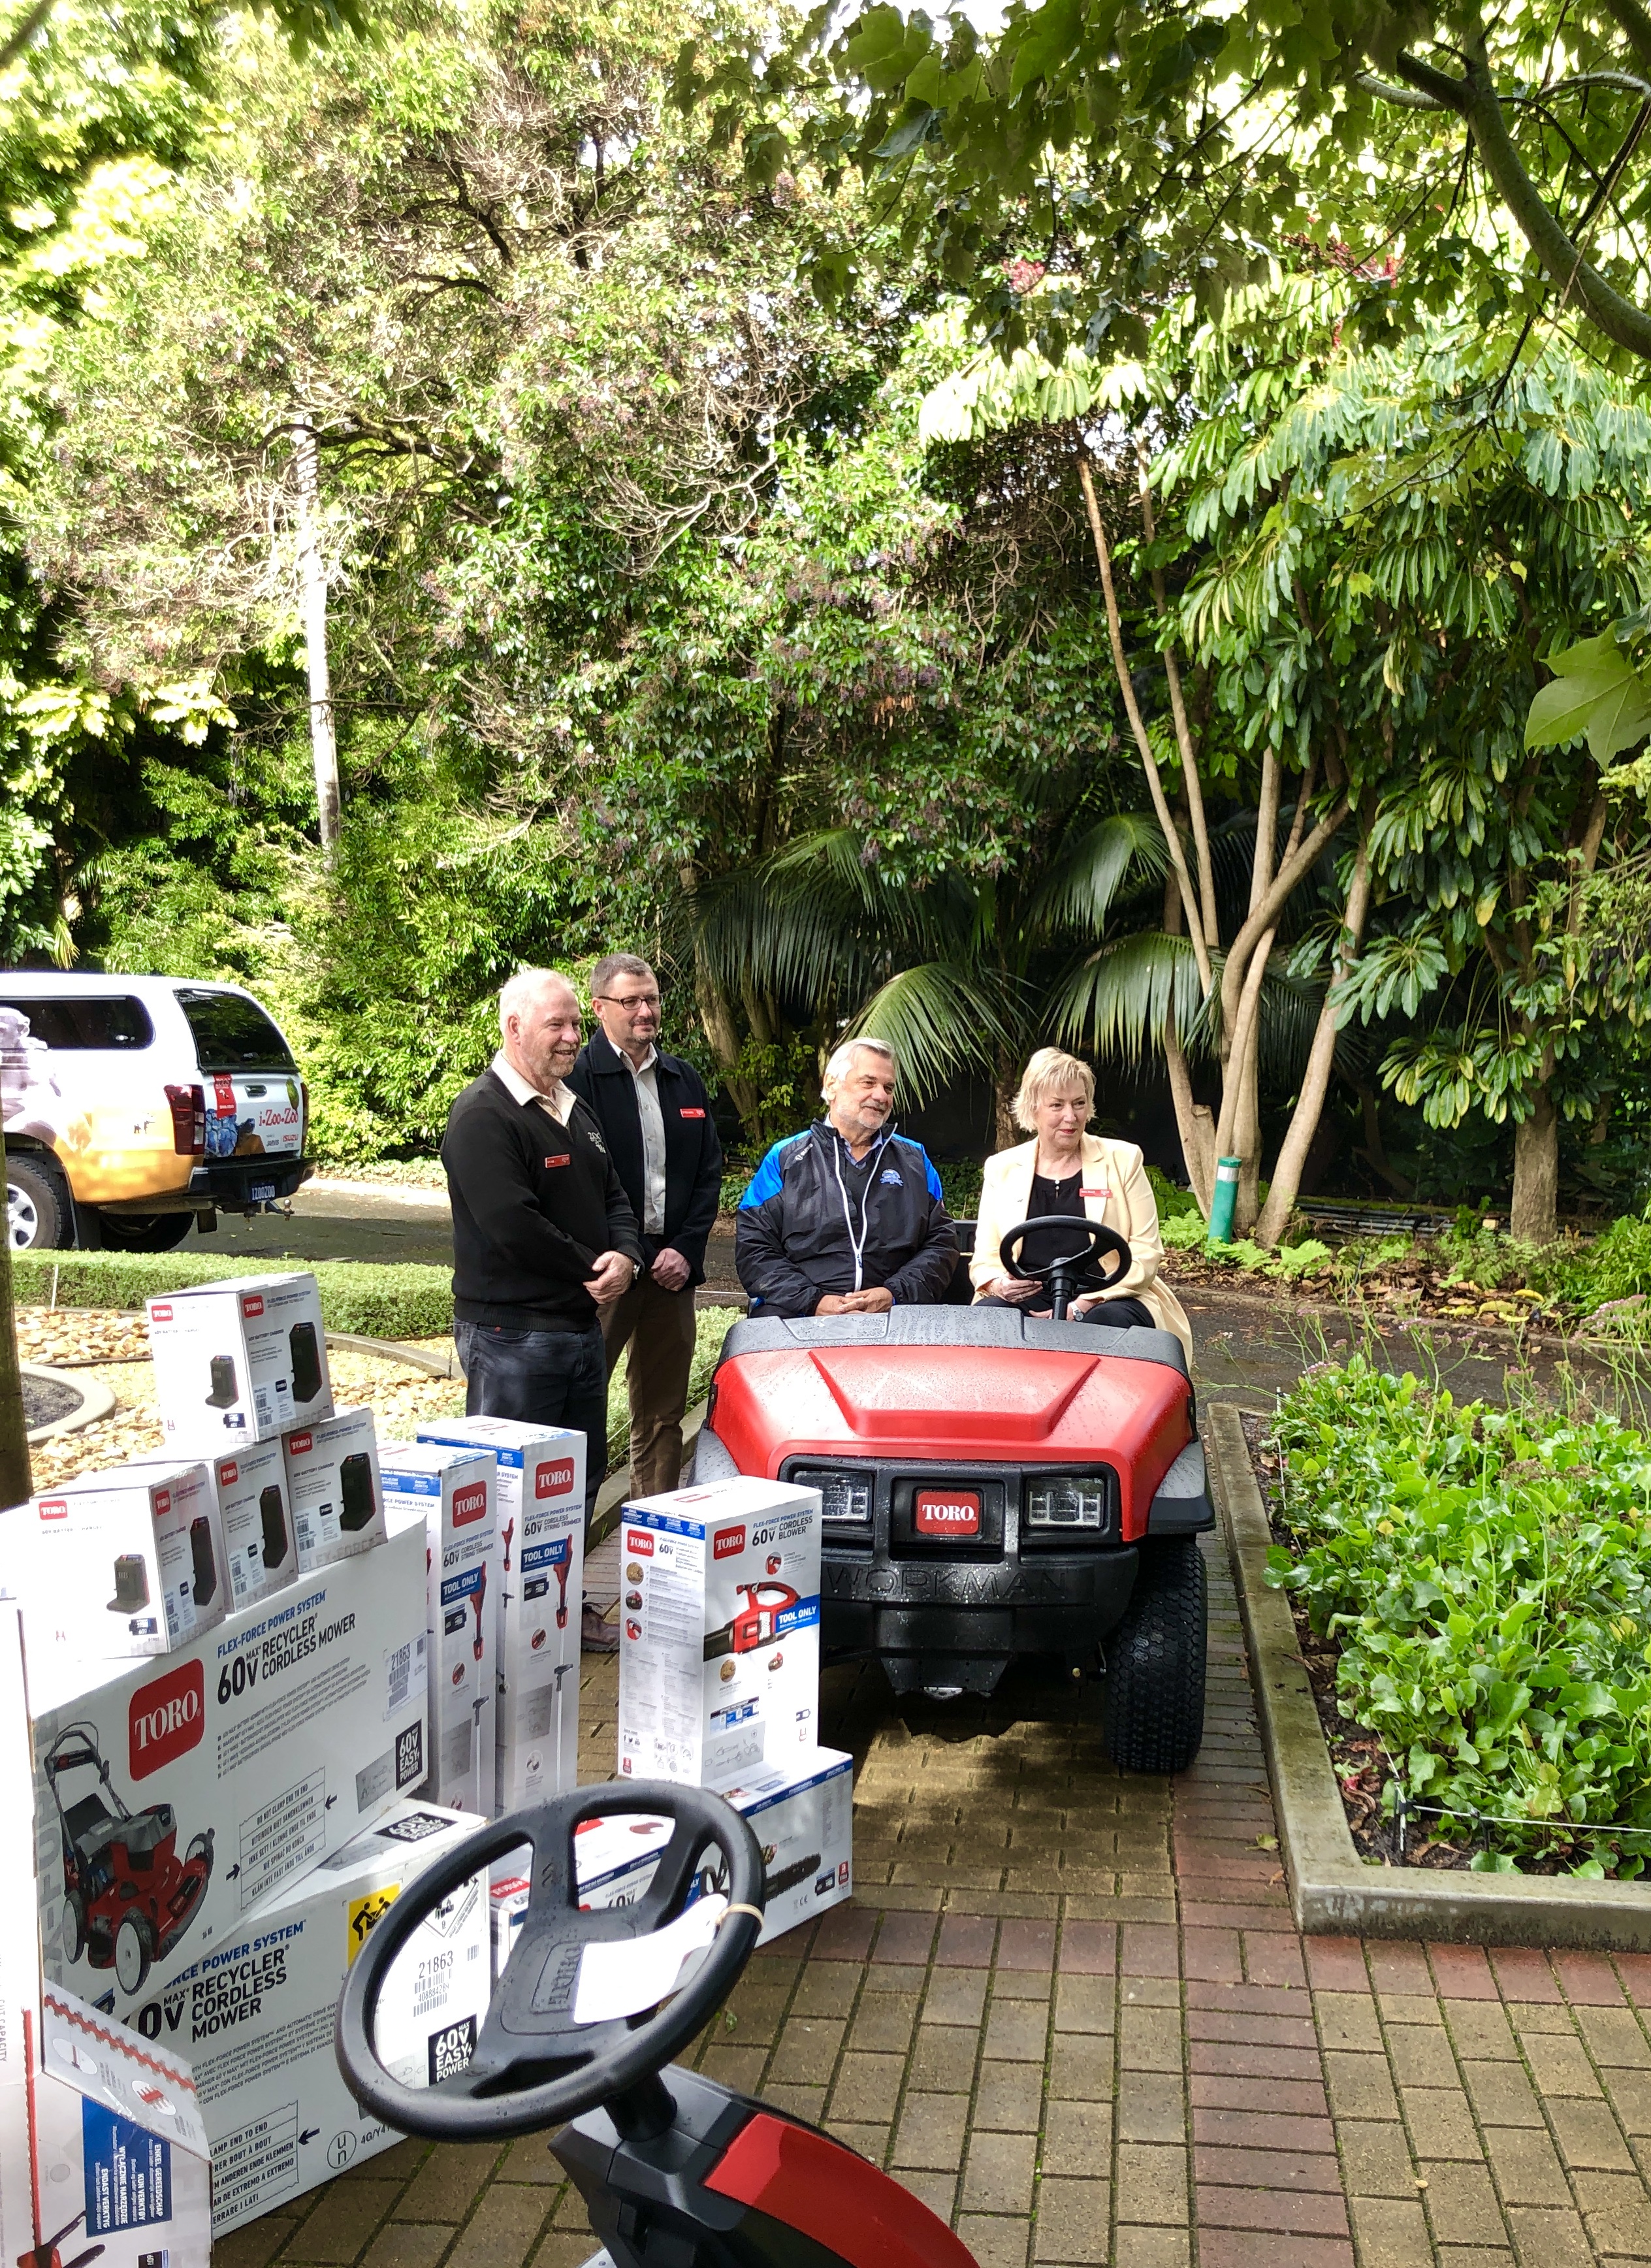 Battery-operated equipment for Adelaide Zoo